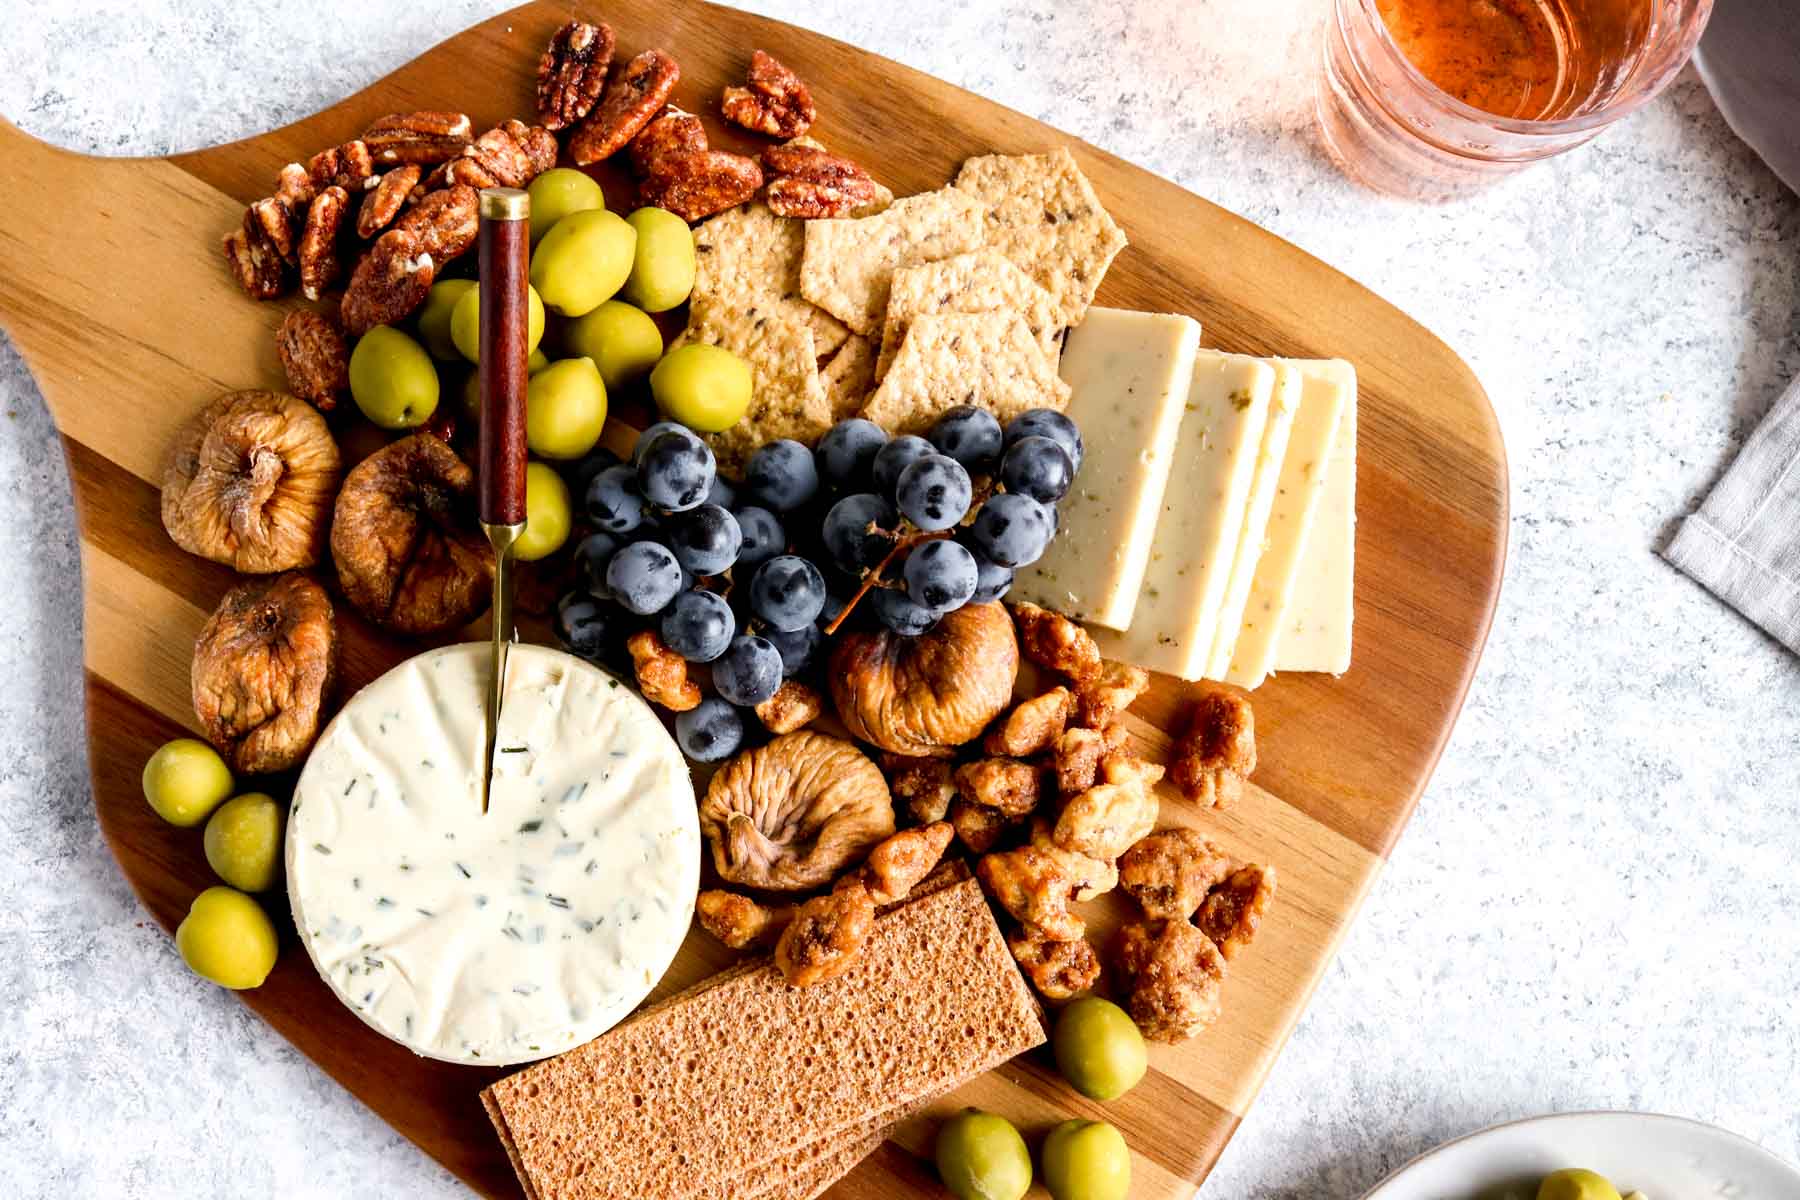 A Vegetarian charcuterie board with grapes, nuts, olives and cheese.